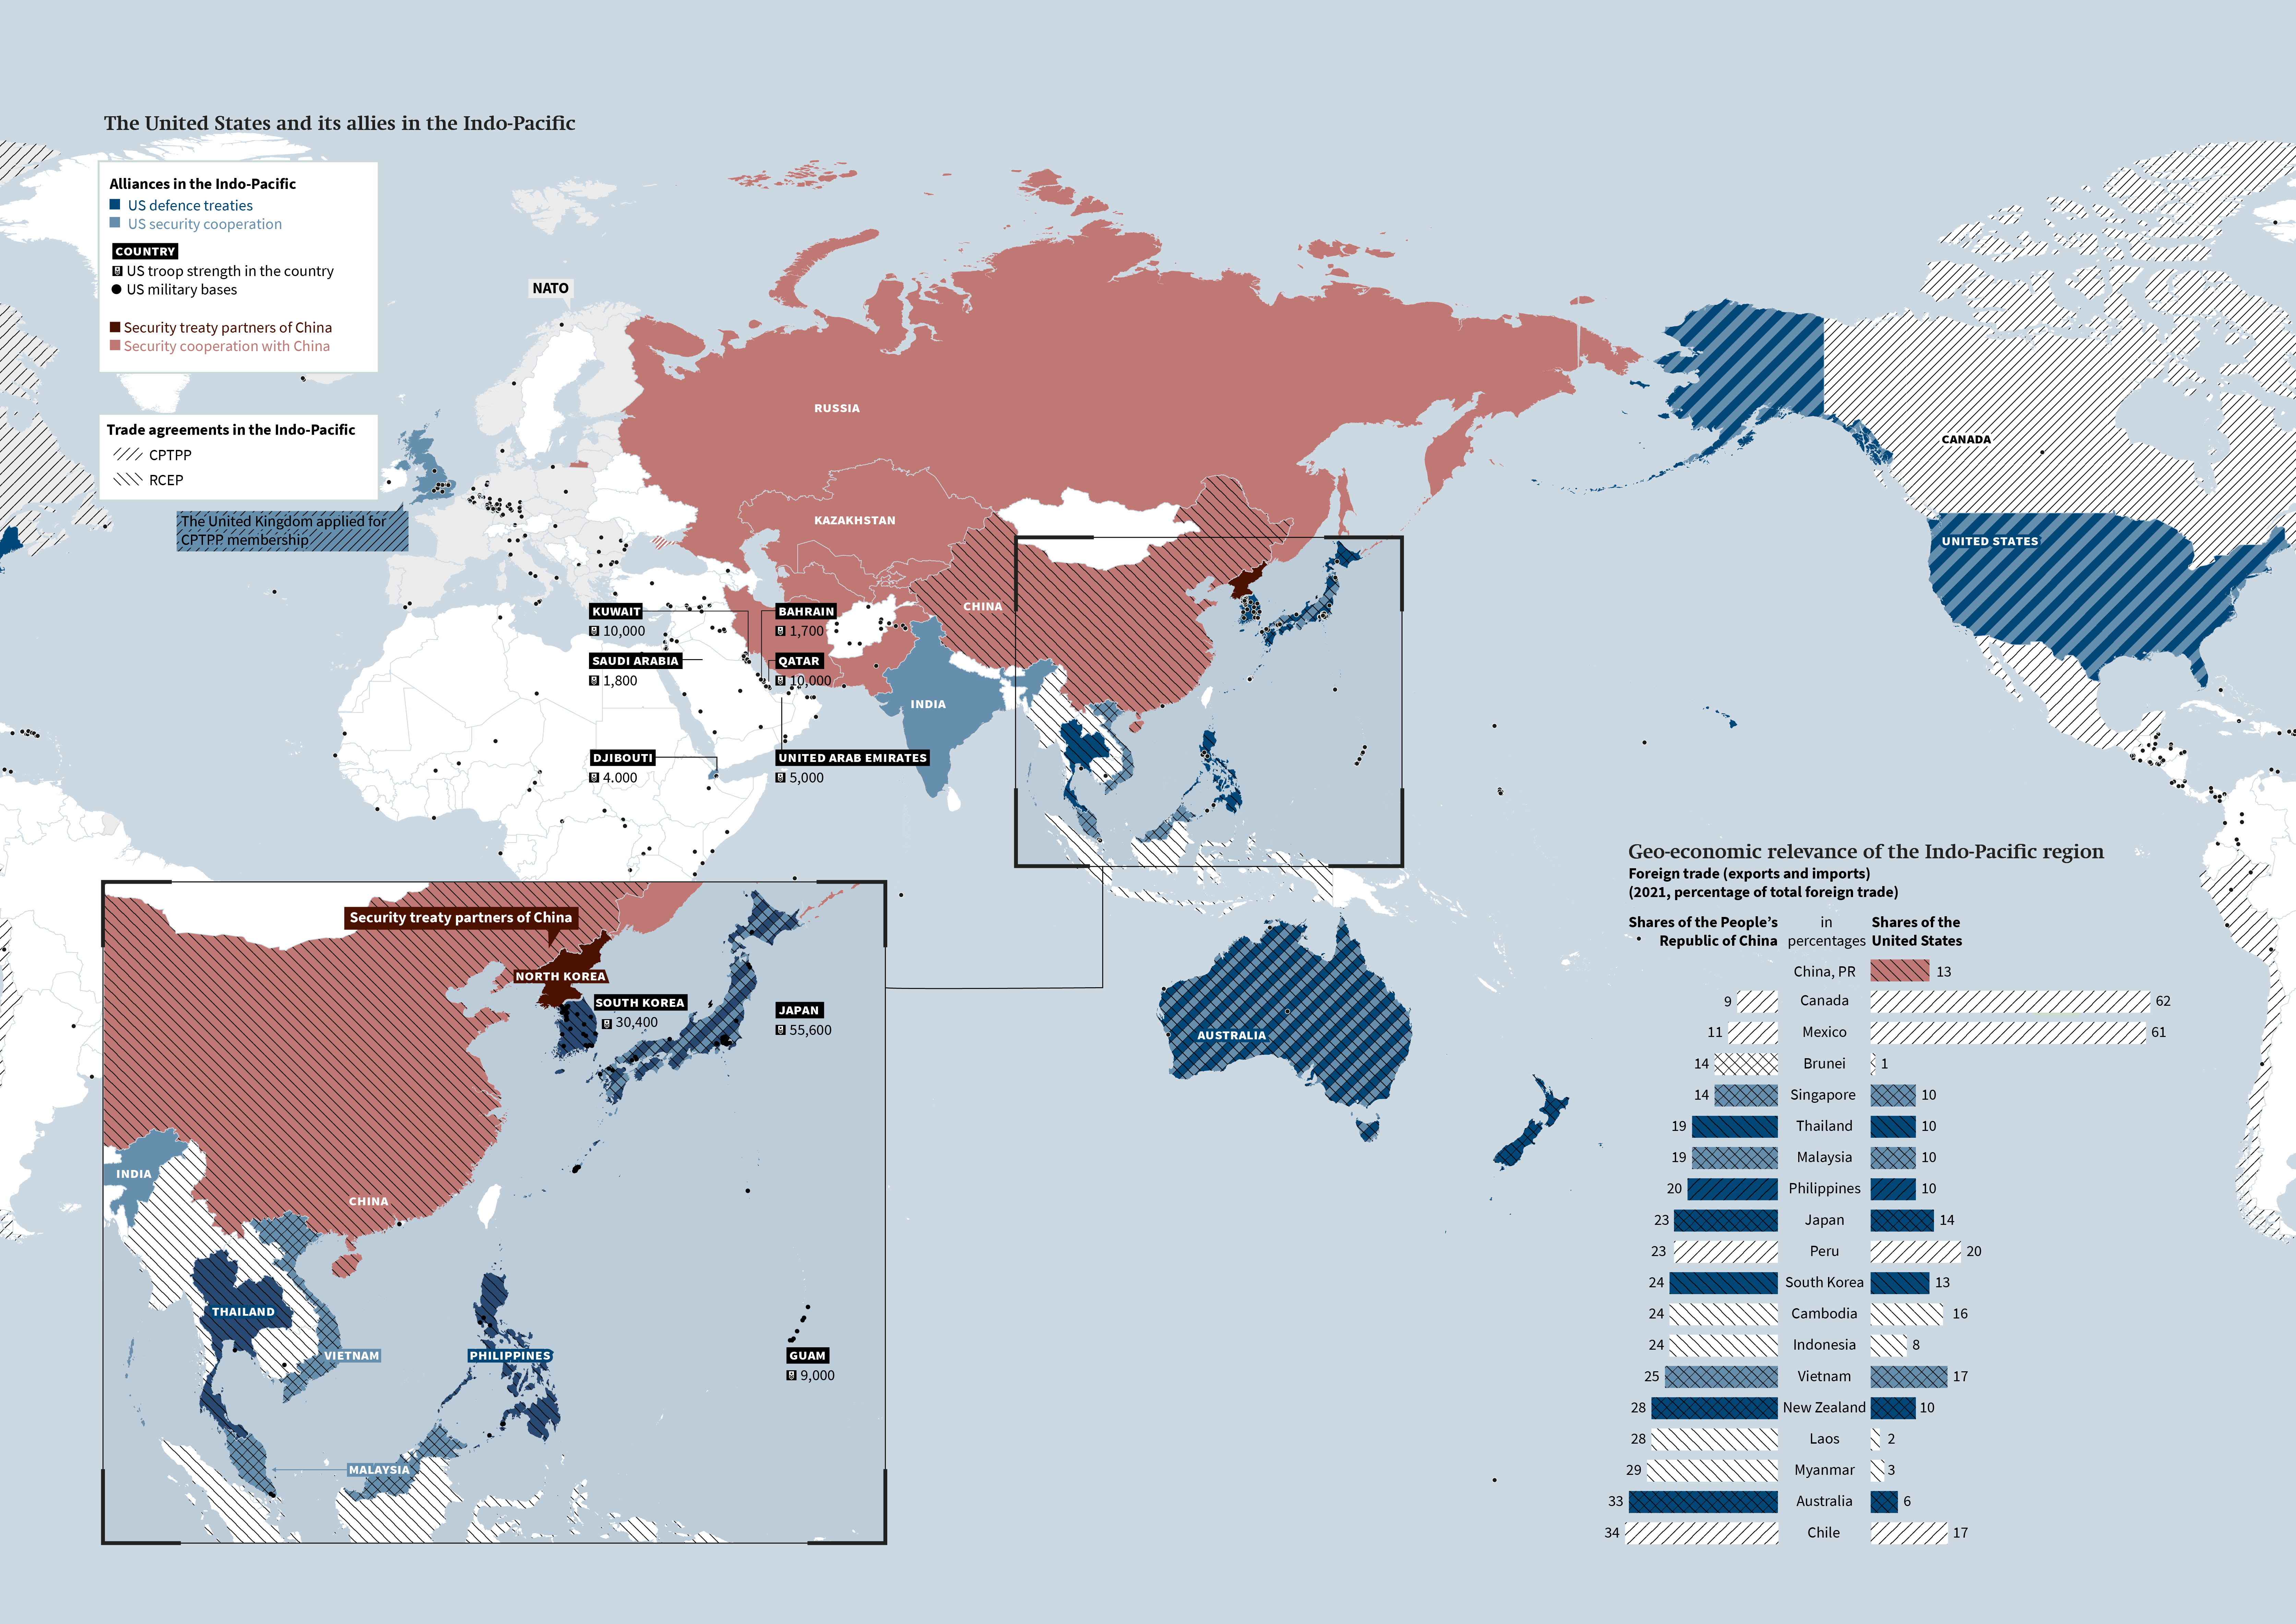 Map: The United States and its allies in the Indo-Pacific